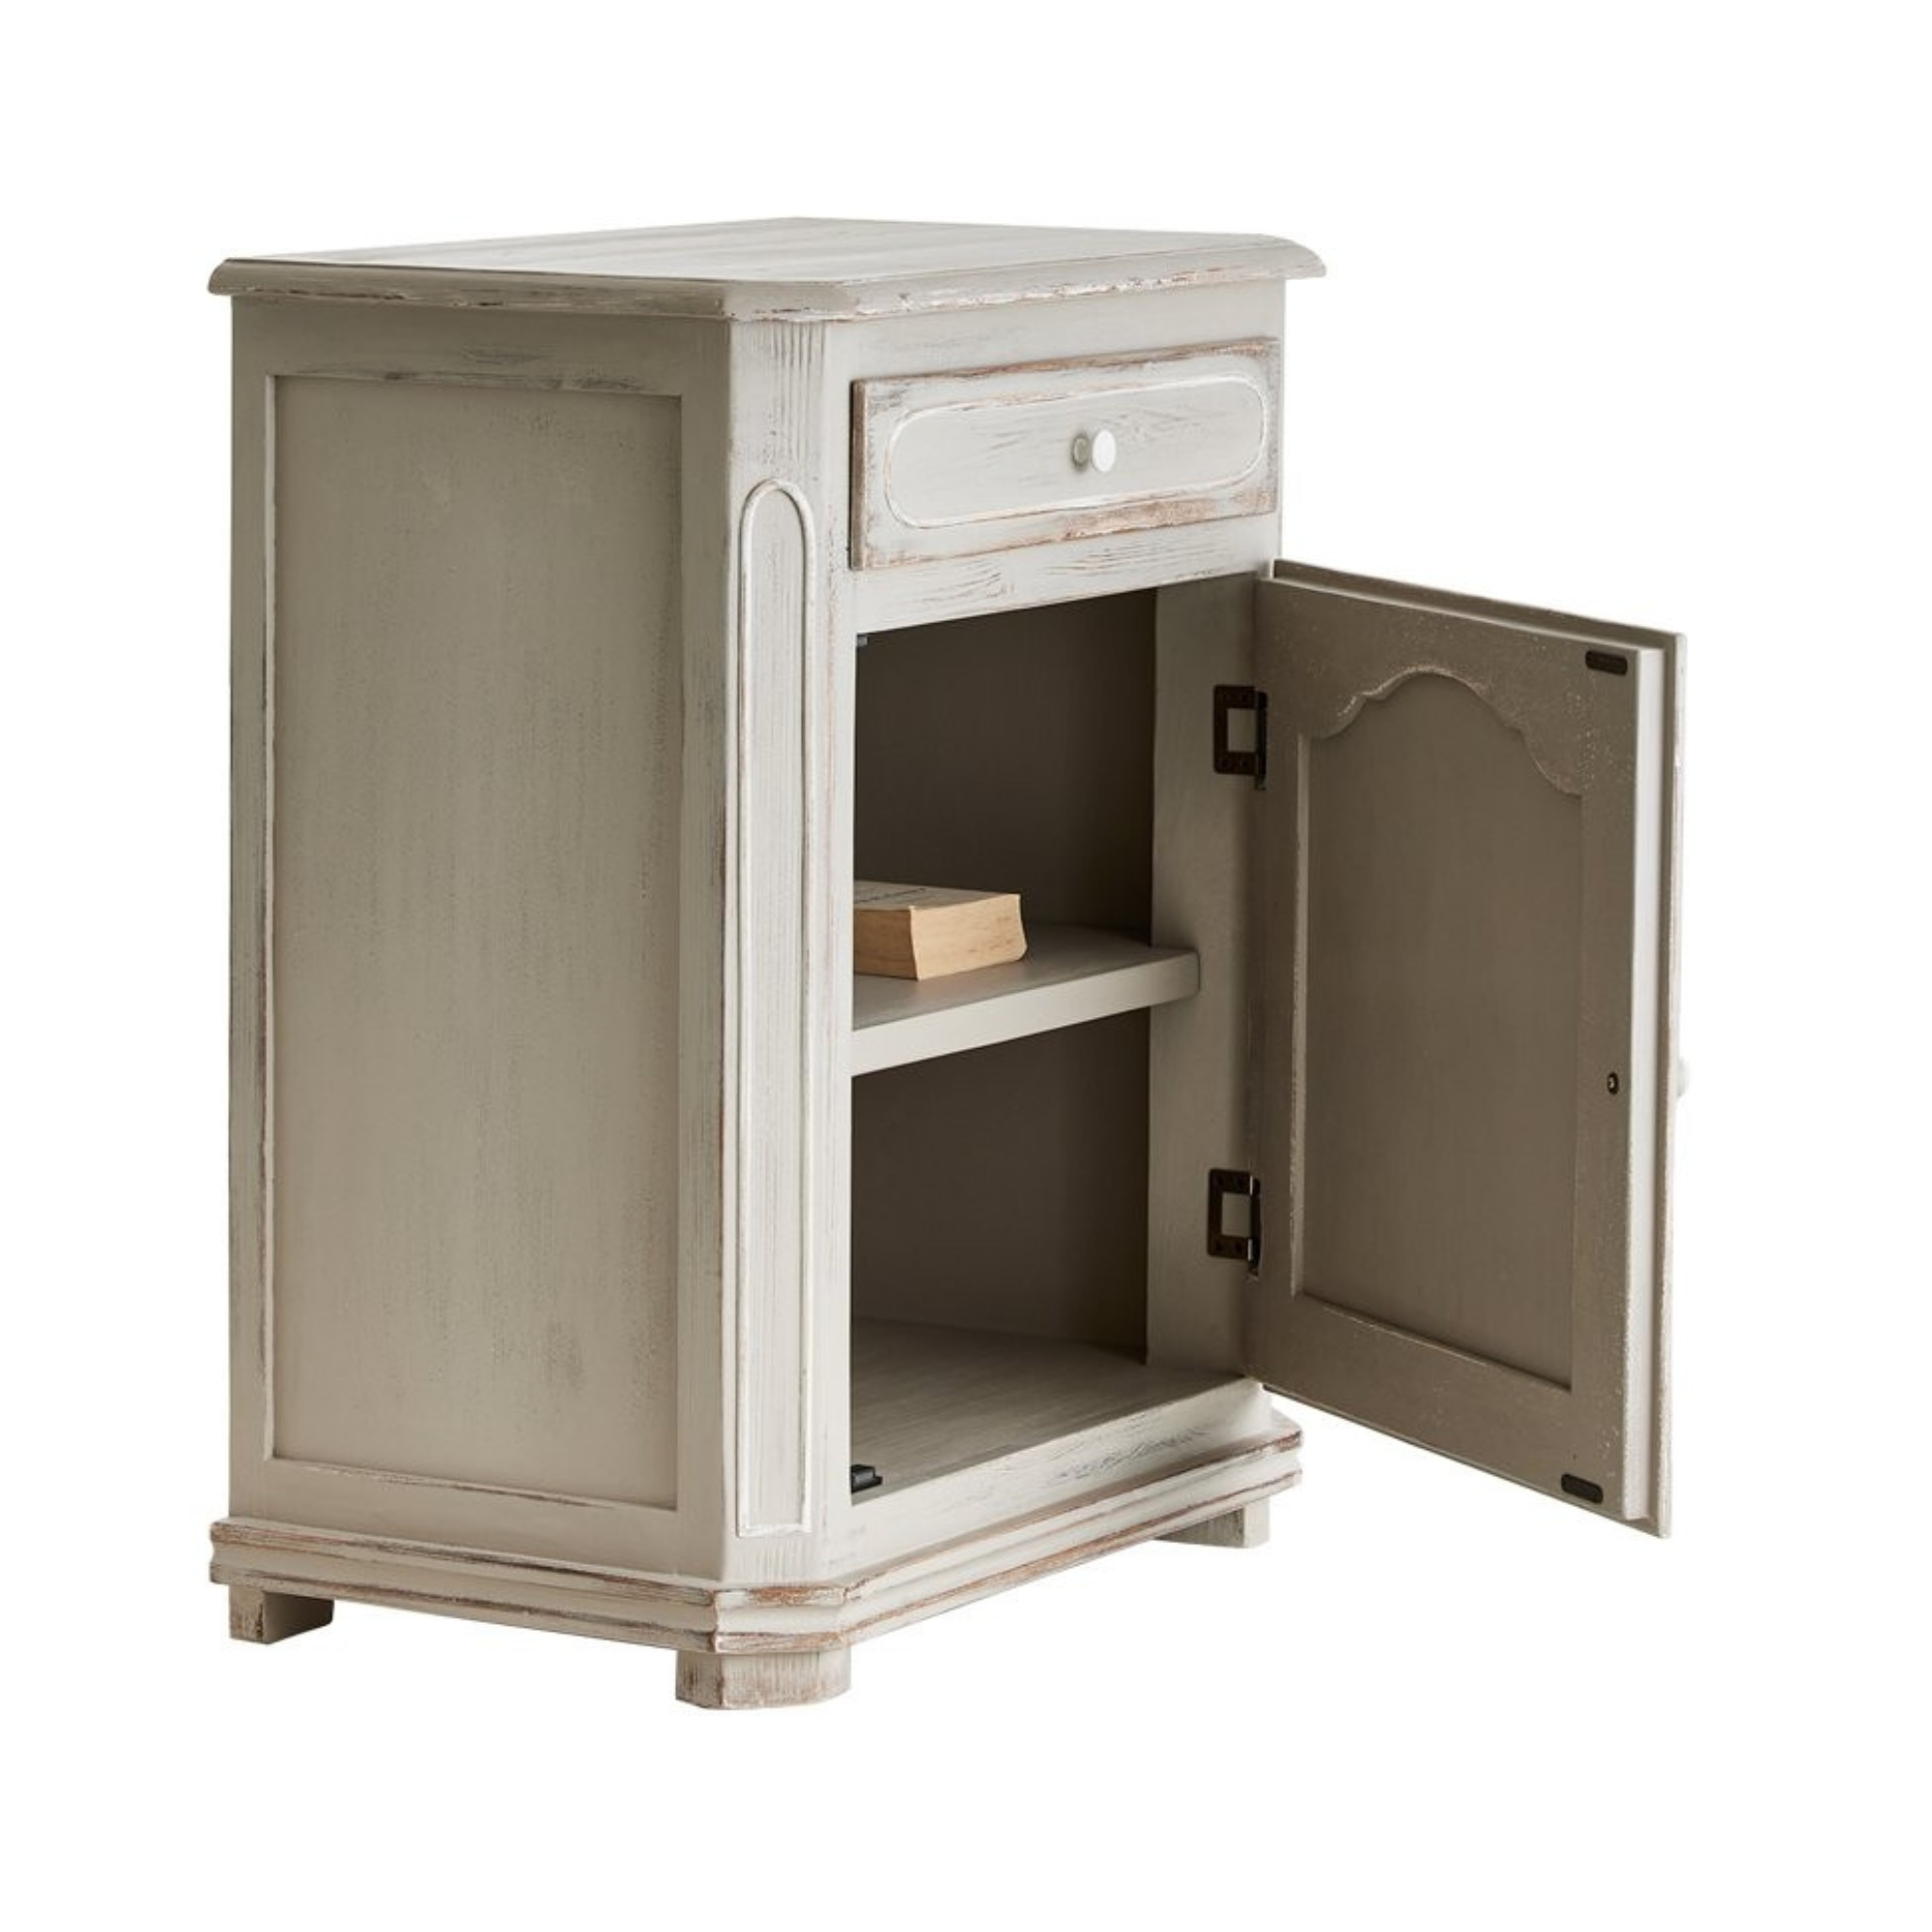 BEVERLEY SMALL CABINET - GREY WHITE